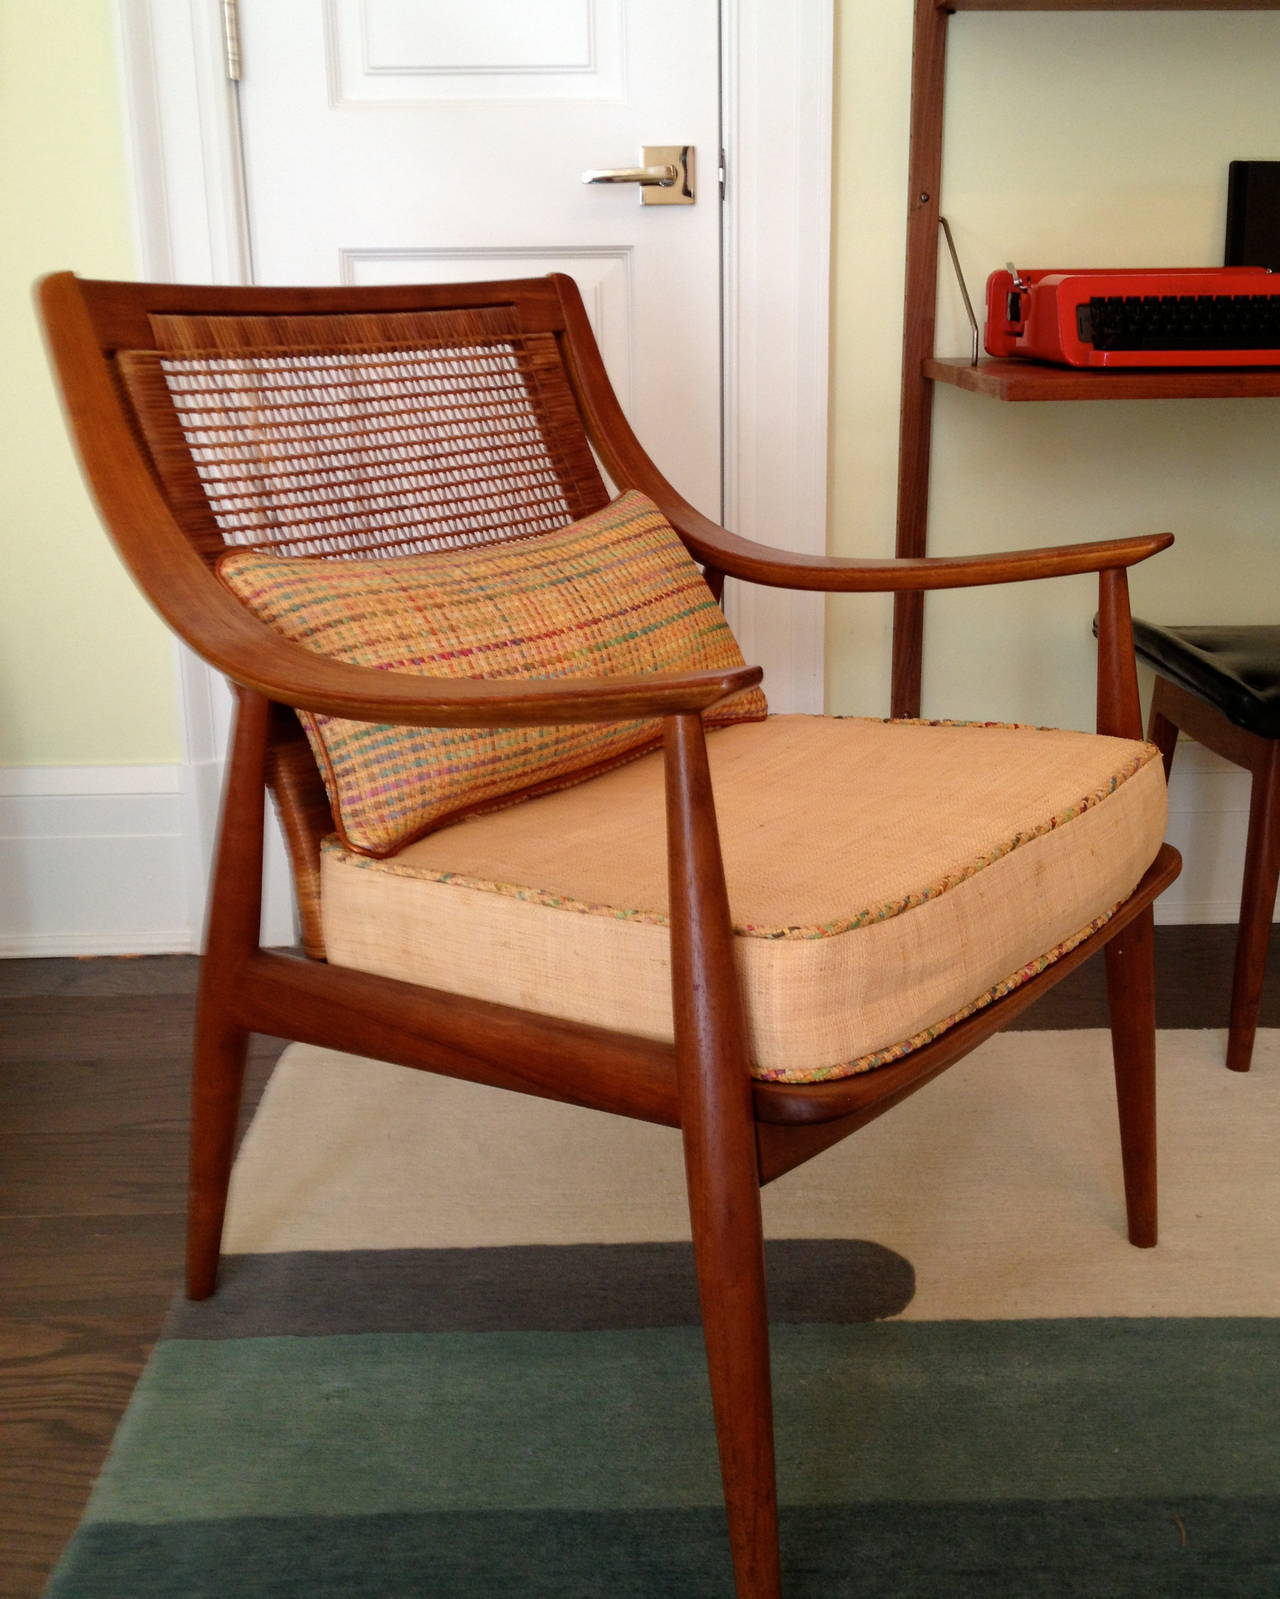 The chair is in excellent original condition, including the cane back.

The seat cushion has been redone and is now covered in natural raffia from Donghia. The lumbar pillow is covered in a raffia from Kravet. The original cushion covers are